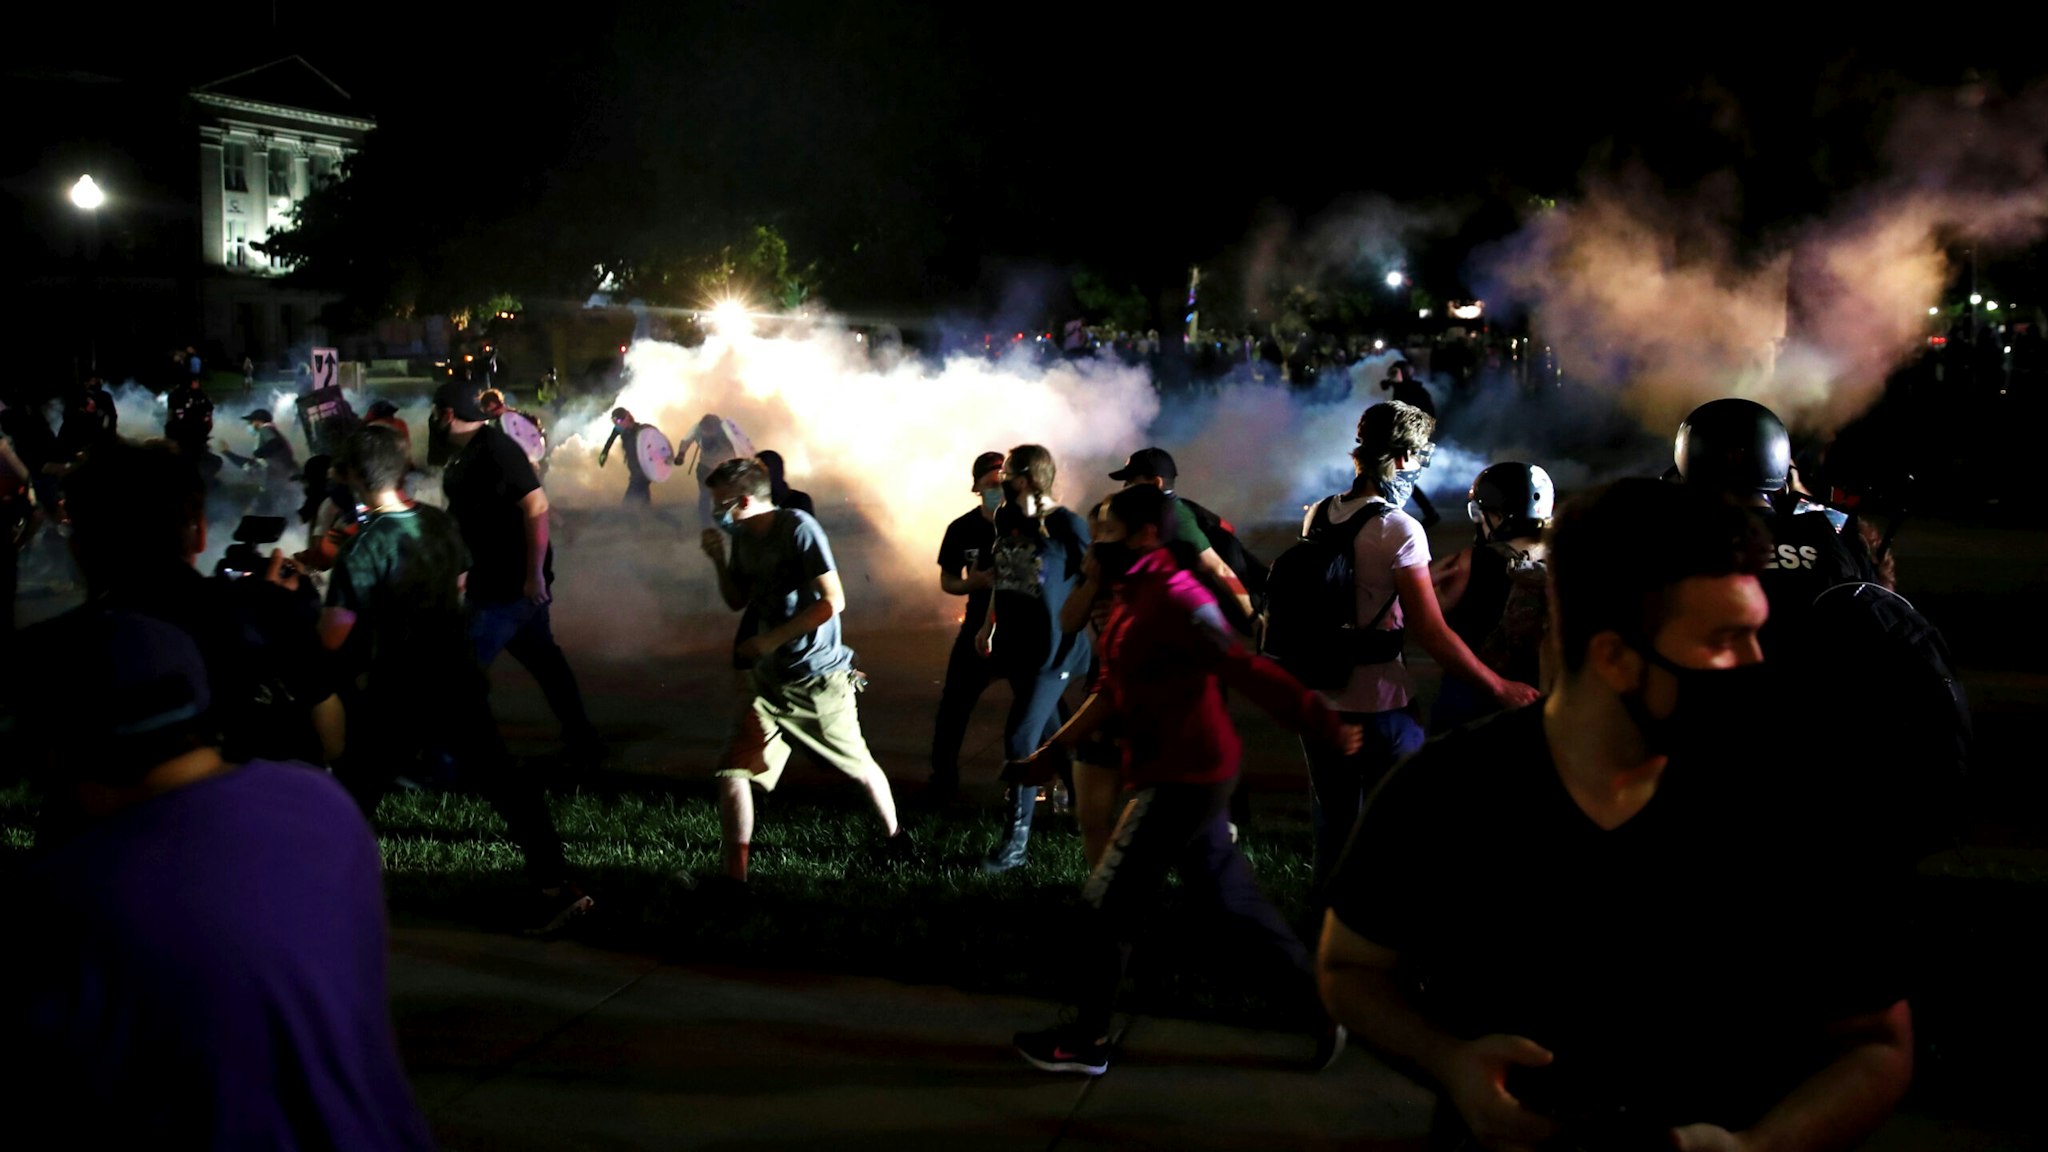 Protestors run for cover as police shoots teargas in an effort to disperse the crowd outside the County Courthouse during demonstrations against the shooting of Jacob Blake in Kenosha, Wisconsin on August 25, 2020. - The mother of a black man shot repeatedly in the back by Wisconsin police called August 25 for calm after two nights of violent protests, as her lawyer said it would take a "miracle" for her son to walk again.